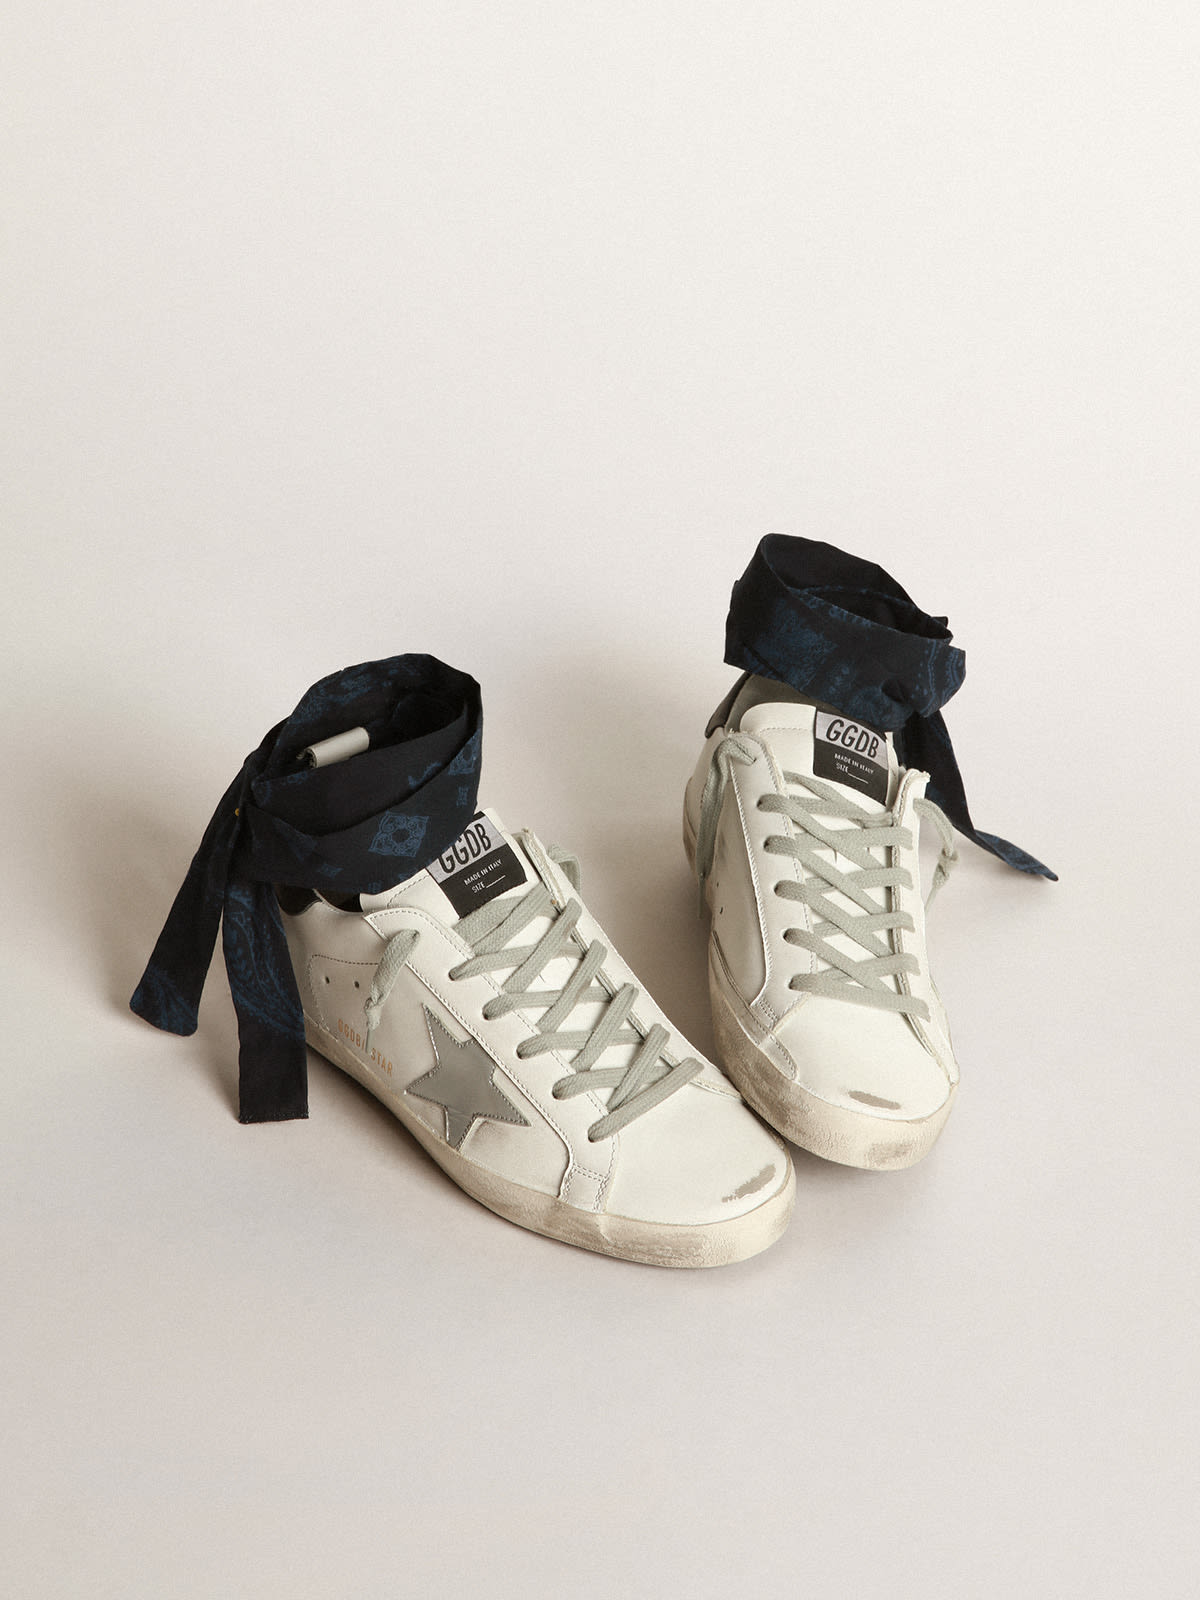 Golden Goose - Super-Star sneakers with bandana insert on the ankle in 